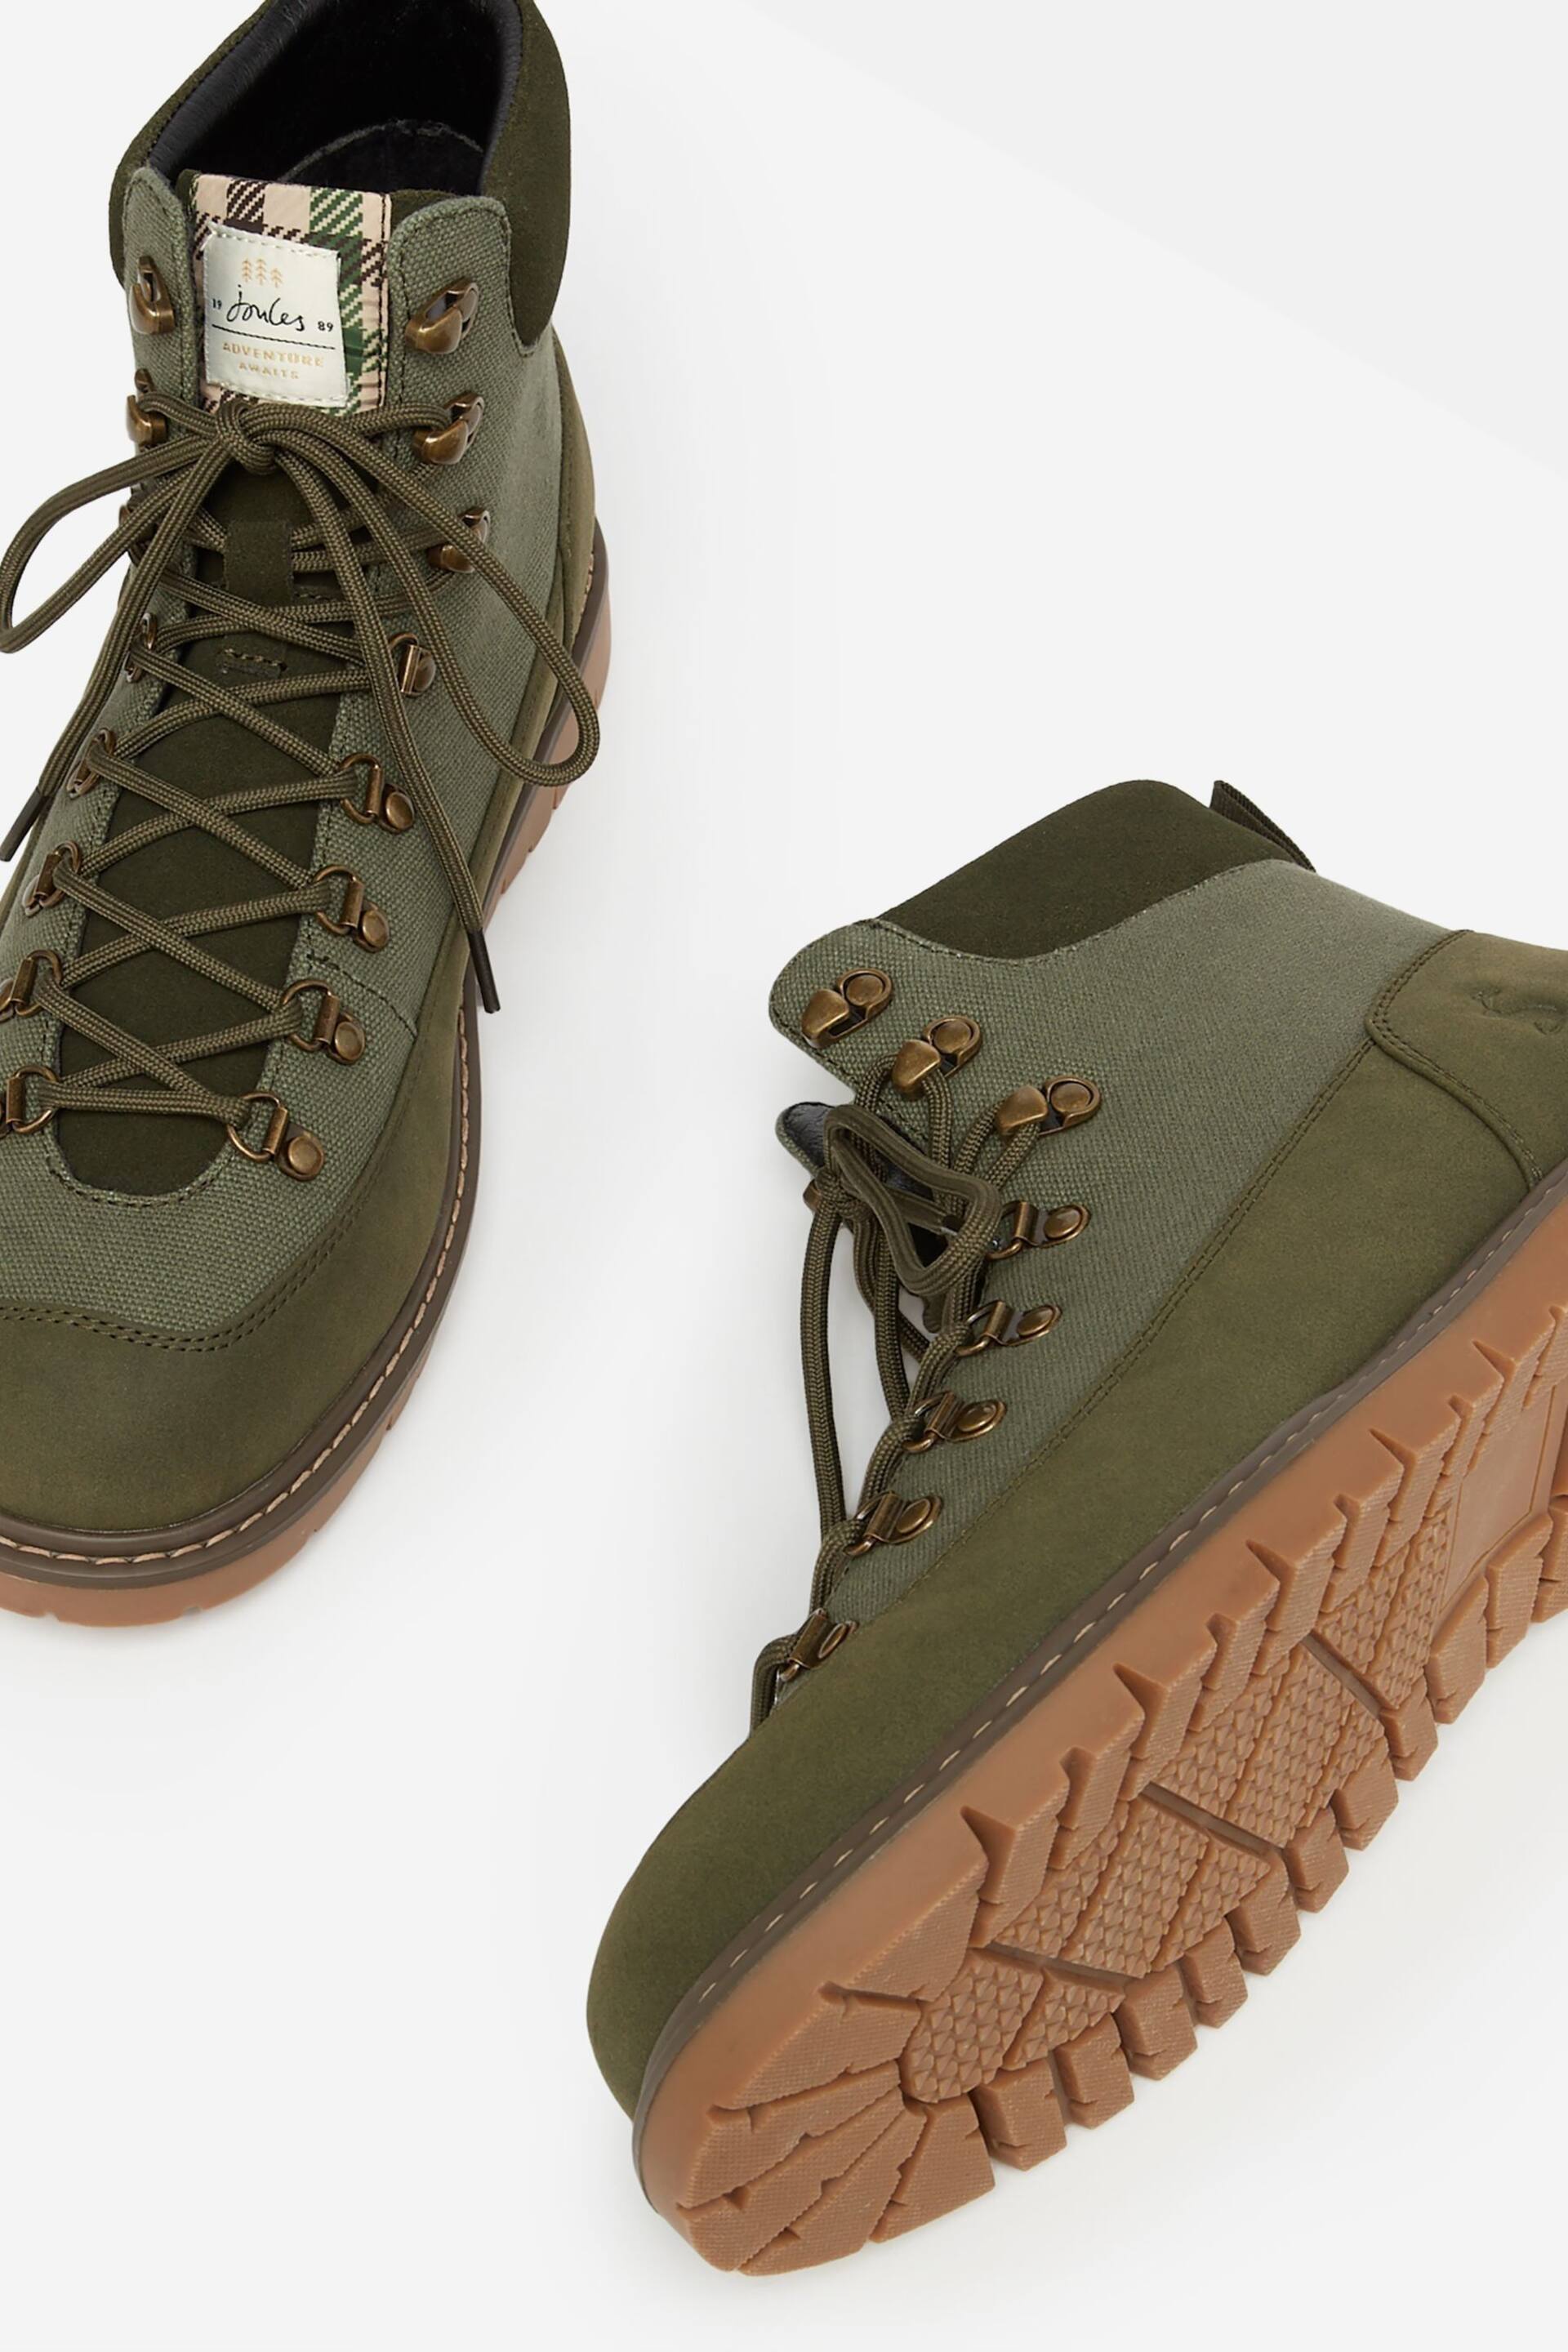 Joules Chester Khaki Green Lace Up Boots - Image 4 of 6